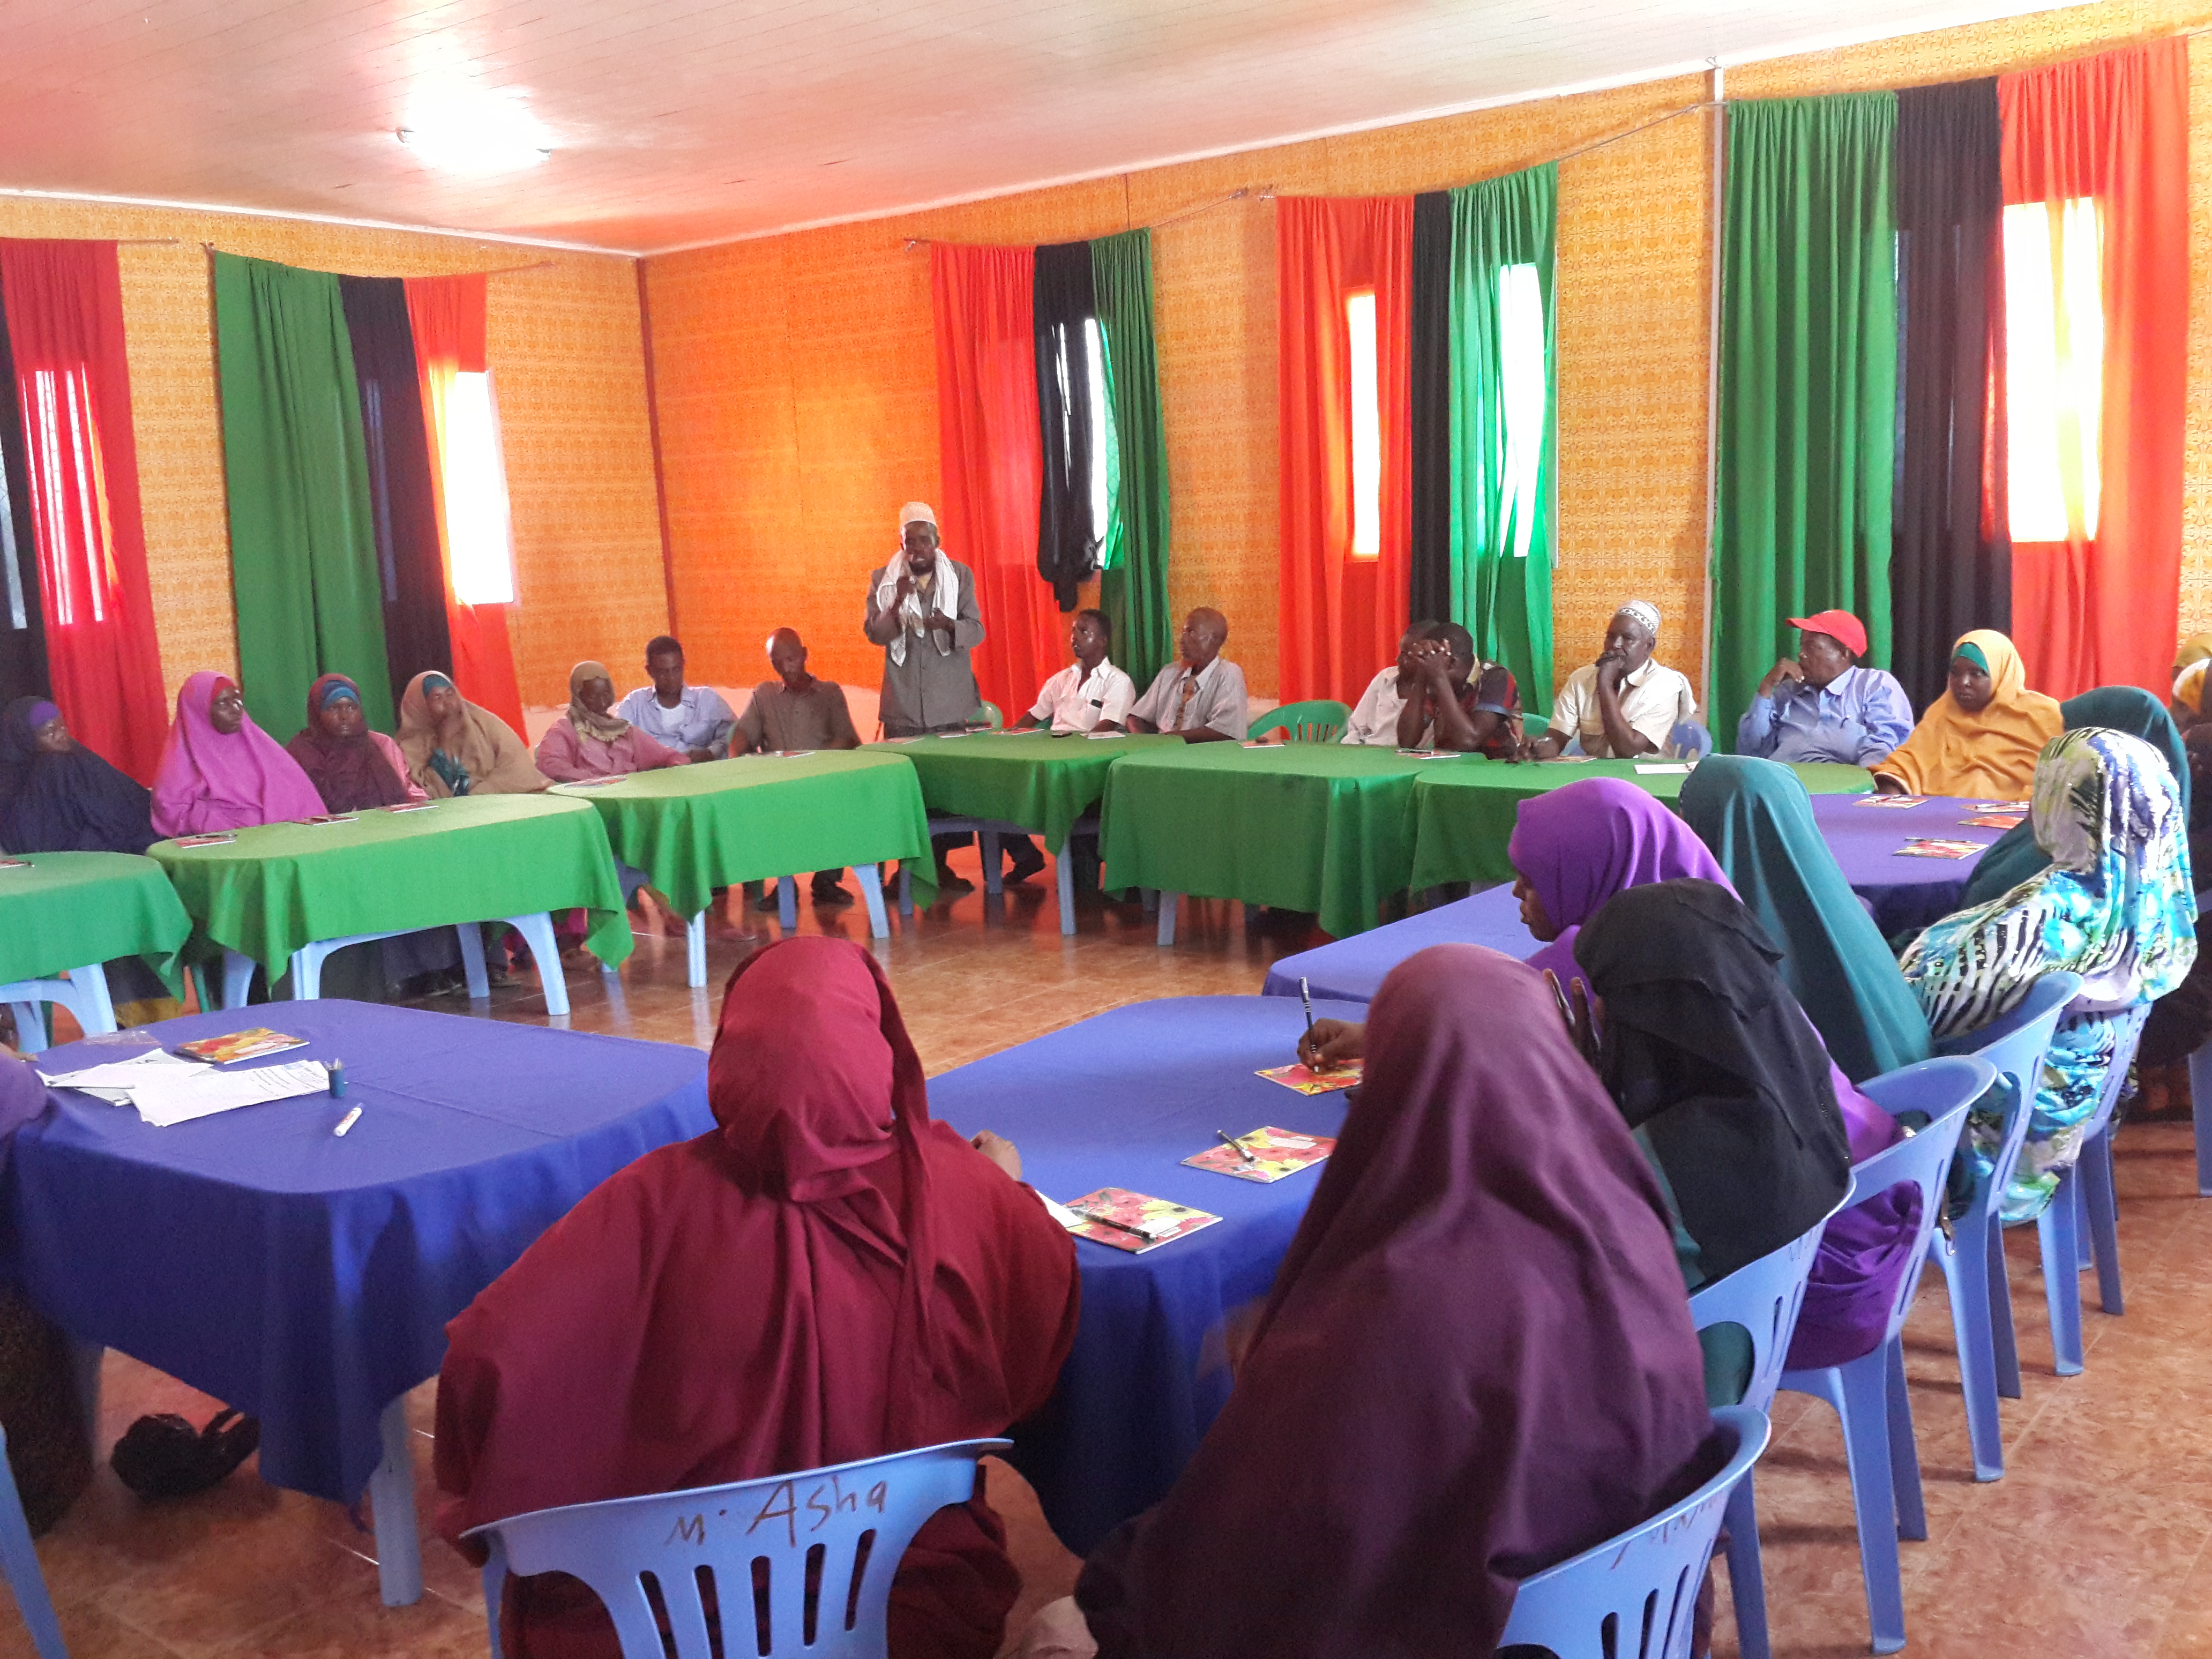 HINNA conducted Commemoration event of International Day of Zero Tolerance for Female Genital Mutilation (FGM/C).